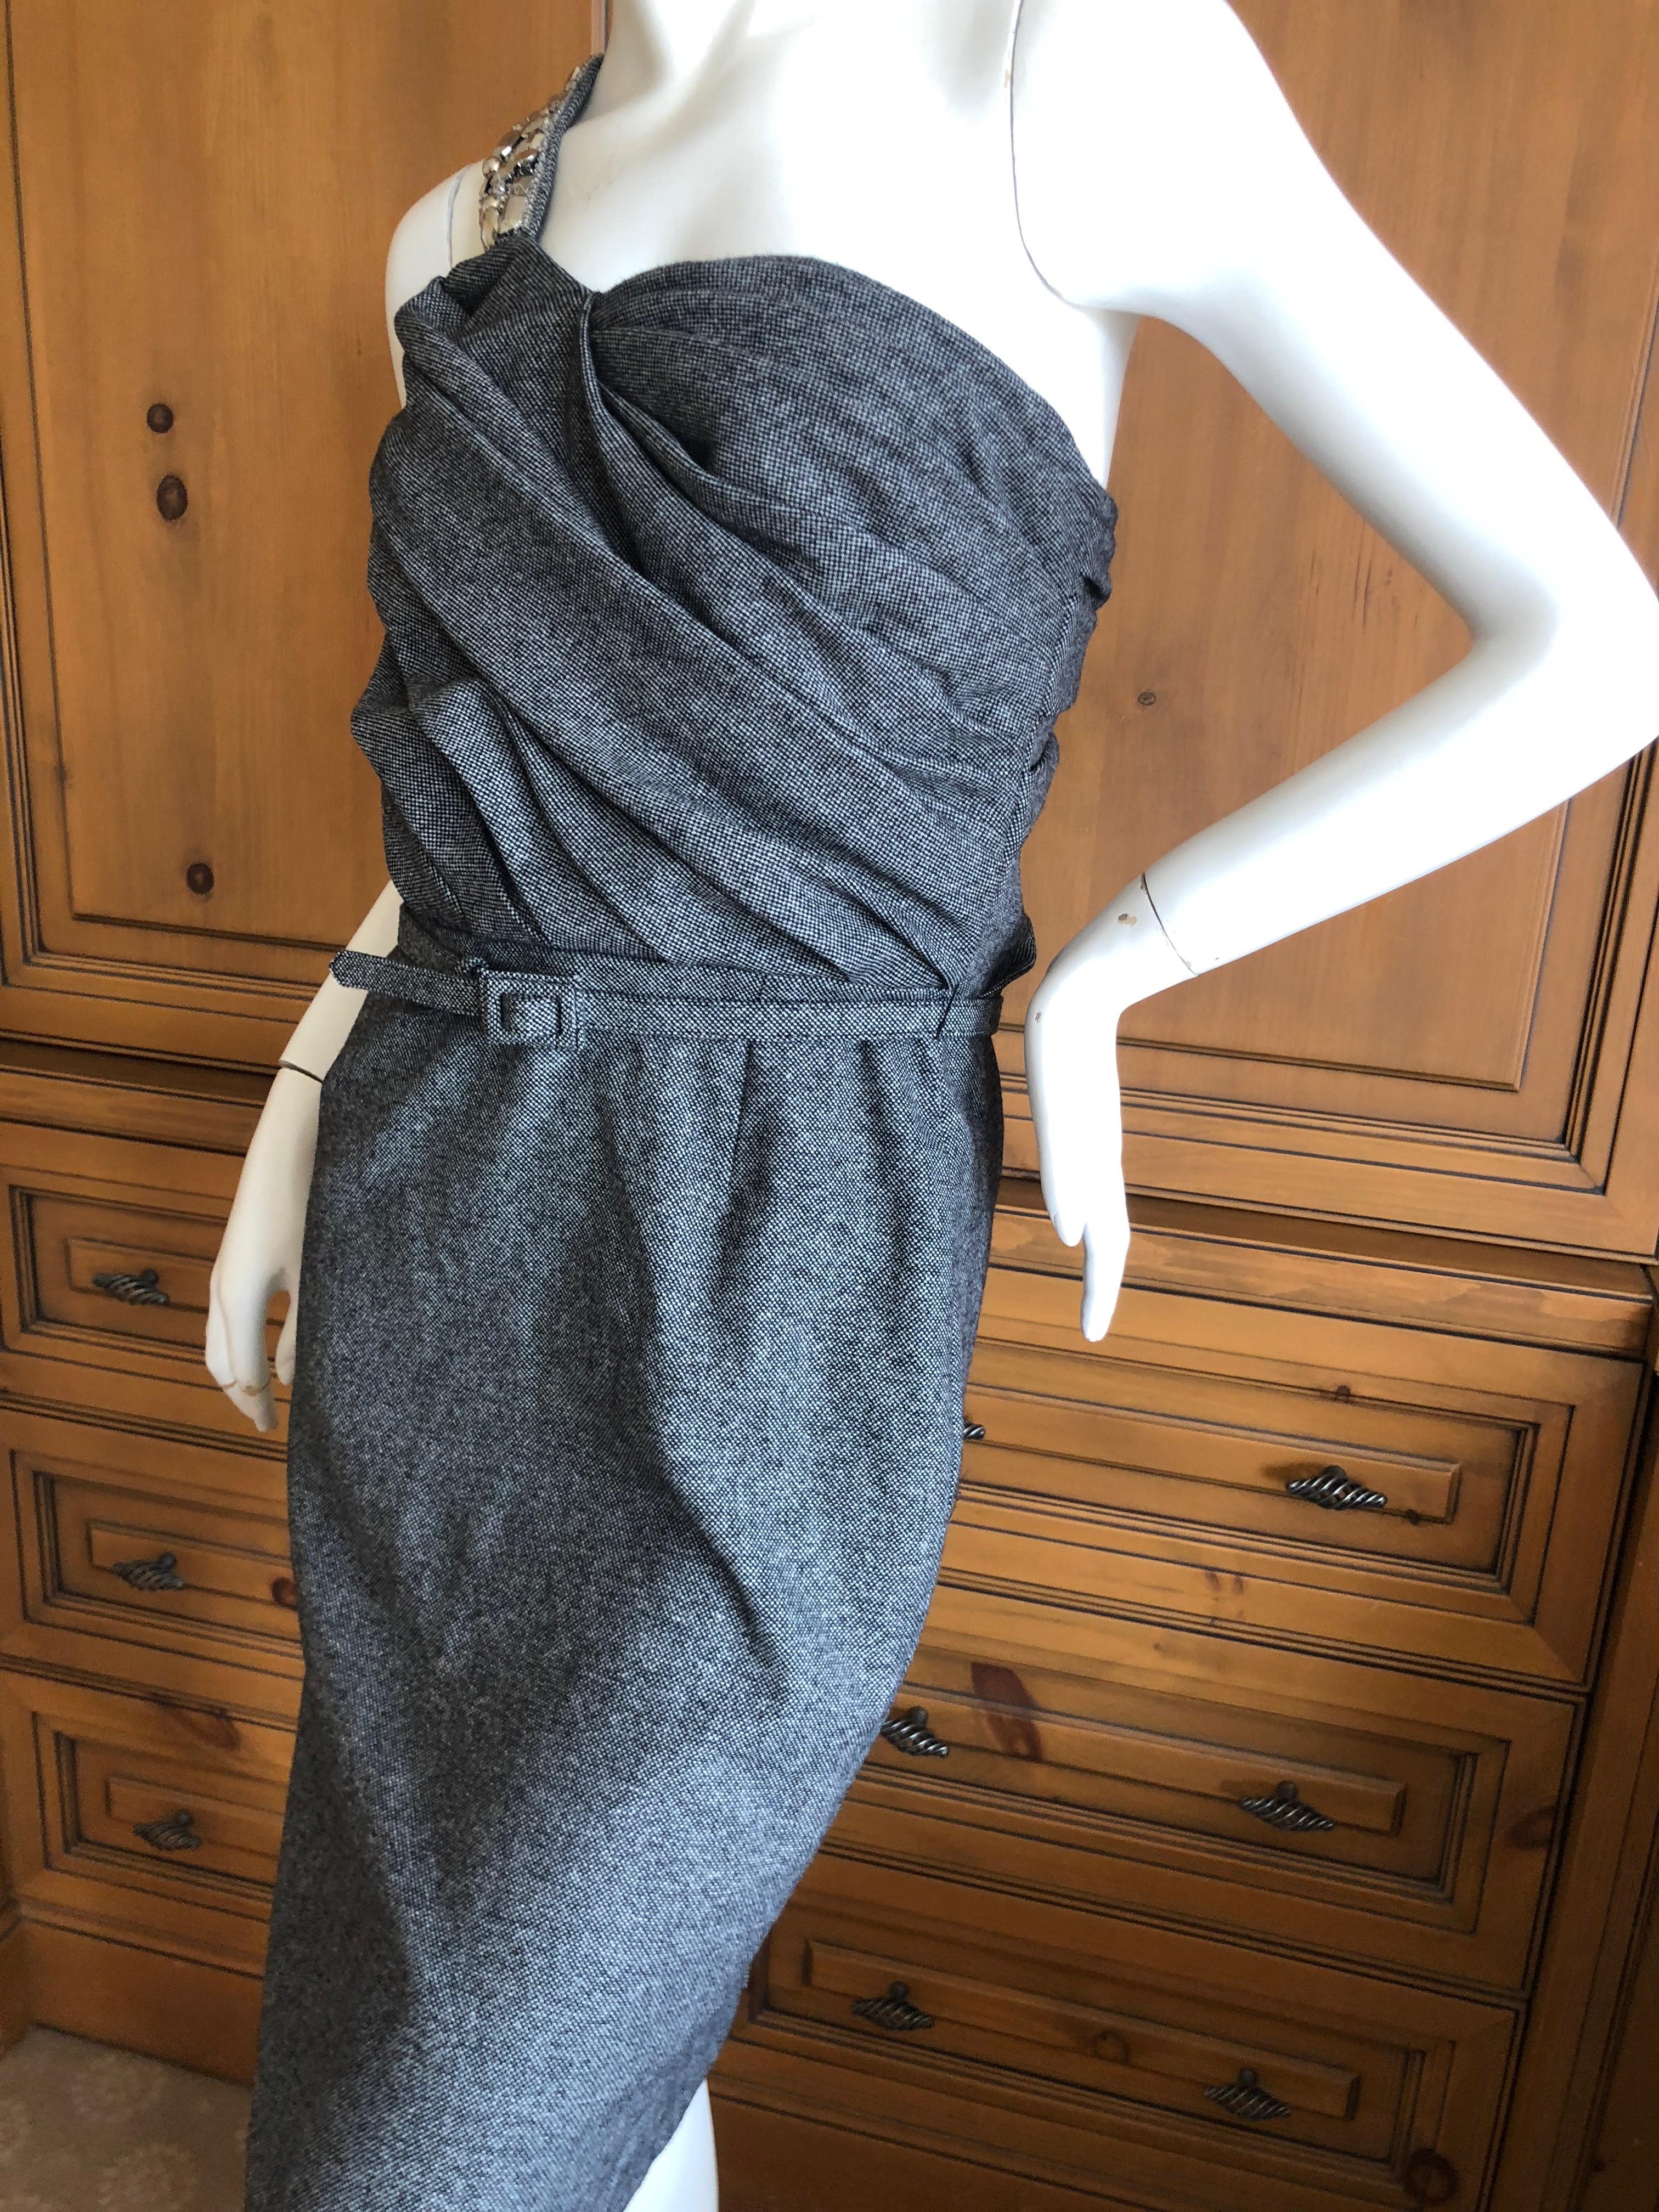 Christian Dior John Galliano Gray Tweed Cocktail Dress with Jewel Shoulder Strap For Sale 5